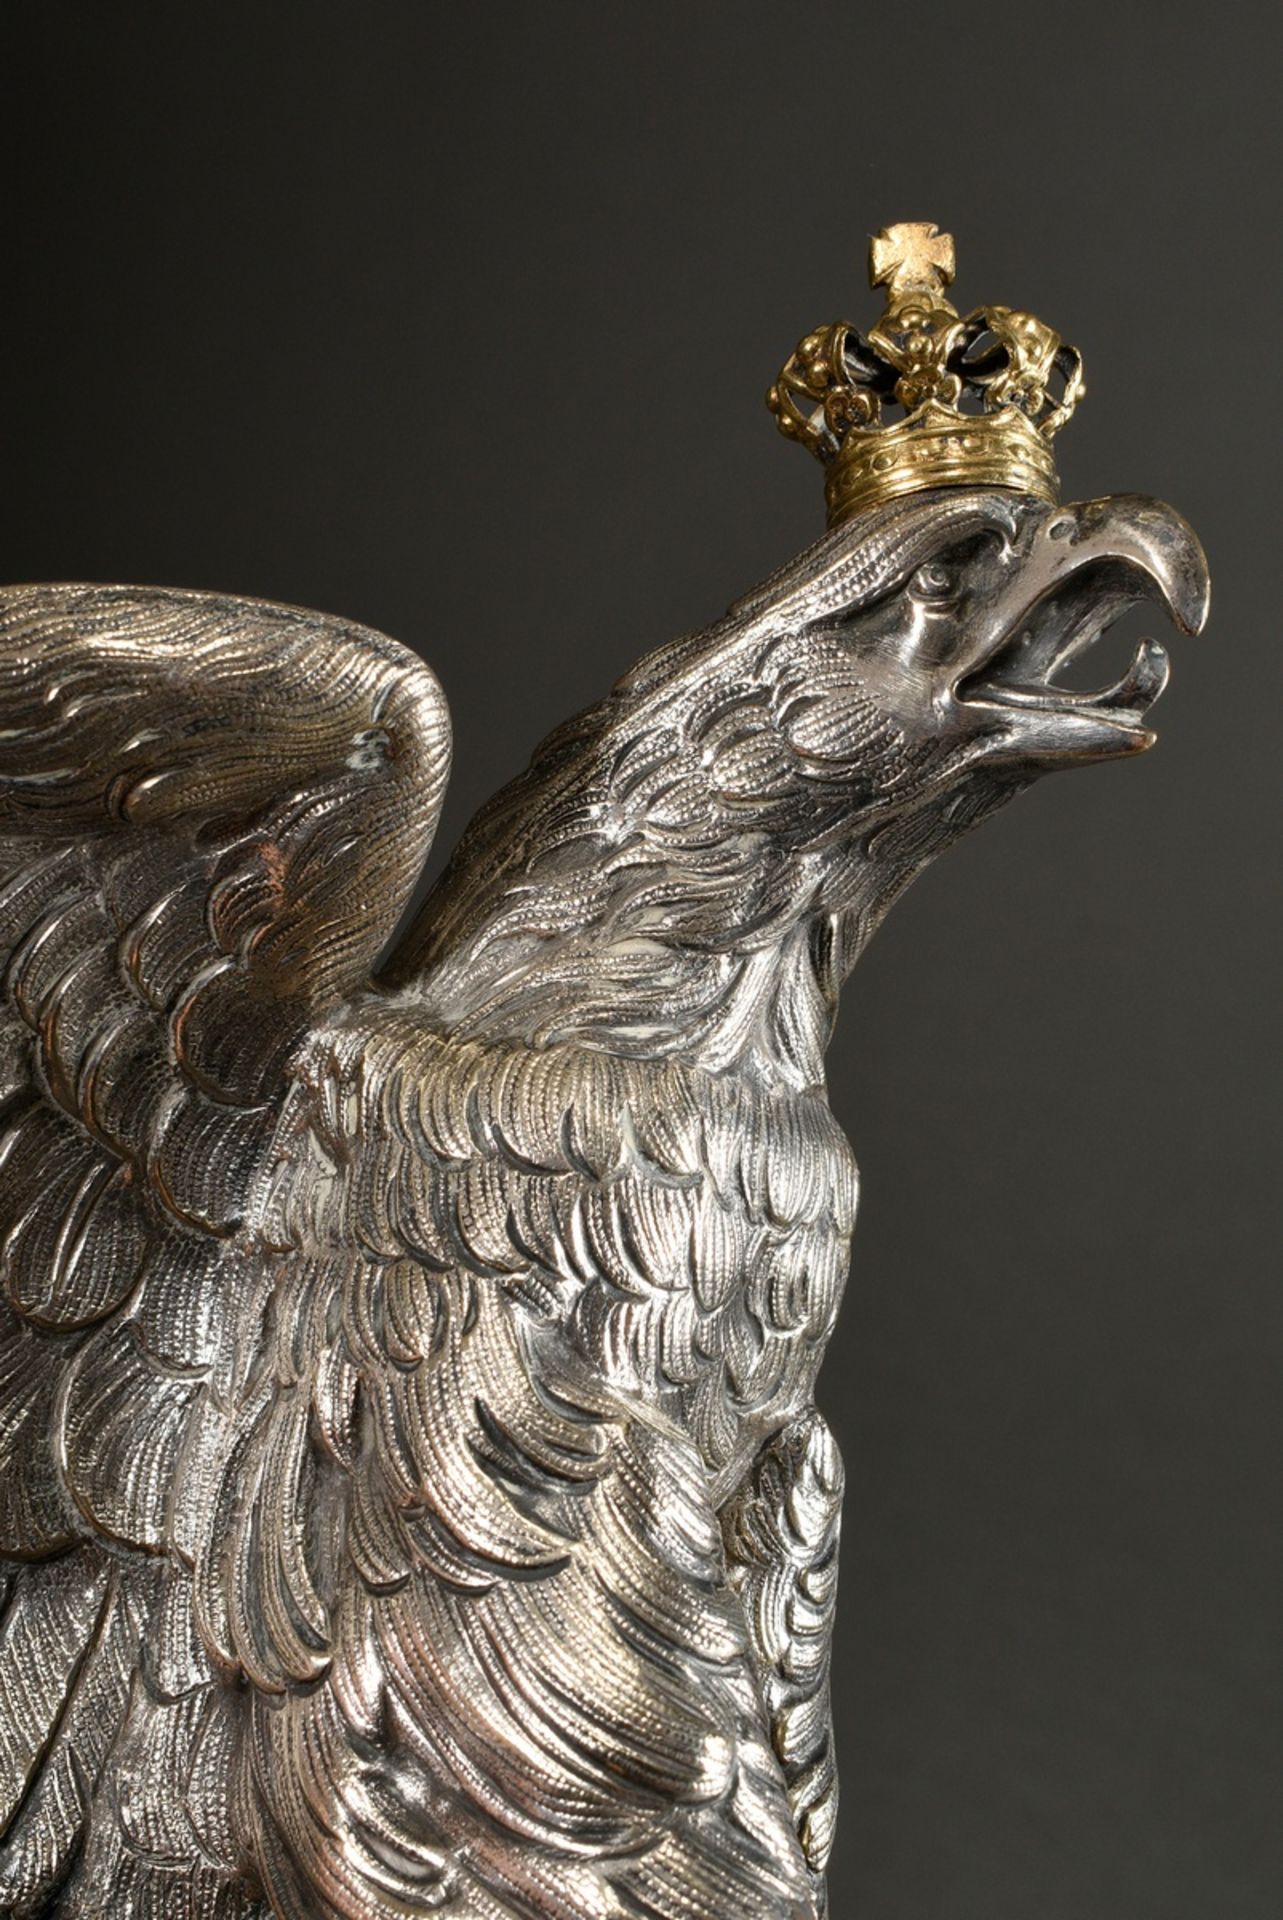 Wilhelmine eagle with German imperial crown in finely chiselled design, approx. 1880/1900, silver-p - Image 4 of 8